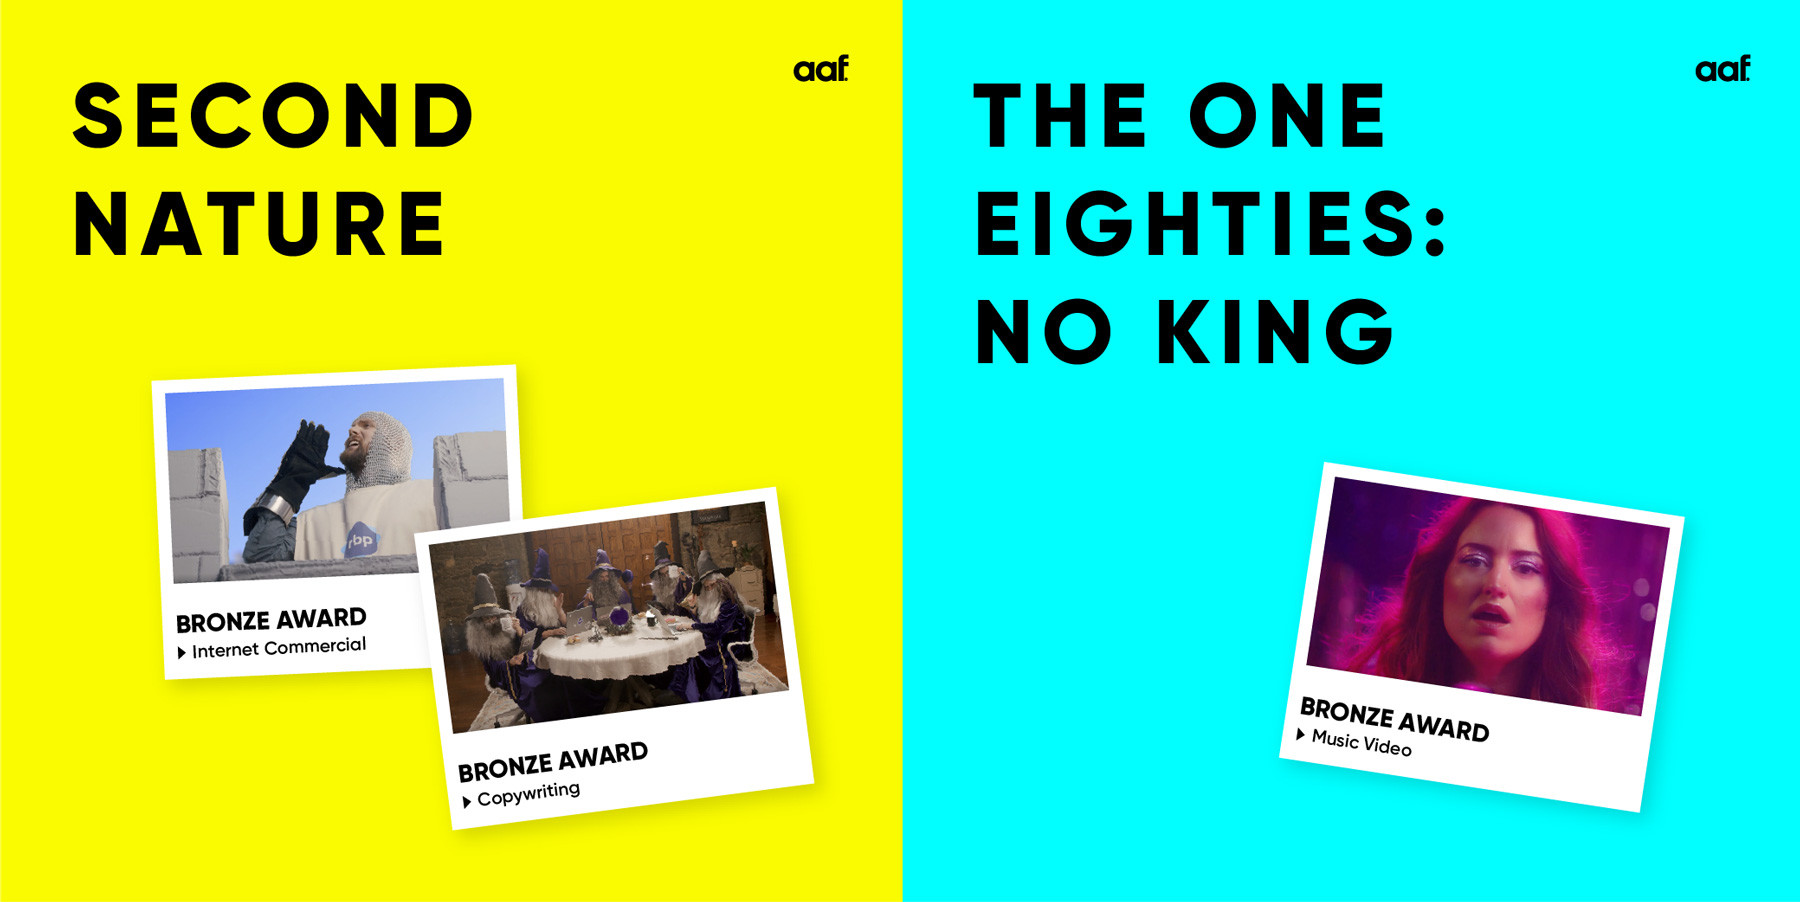 Still images of Second Nature and The One Eighties: No King videos